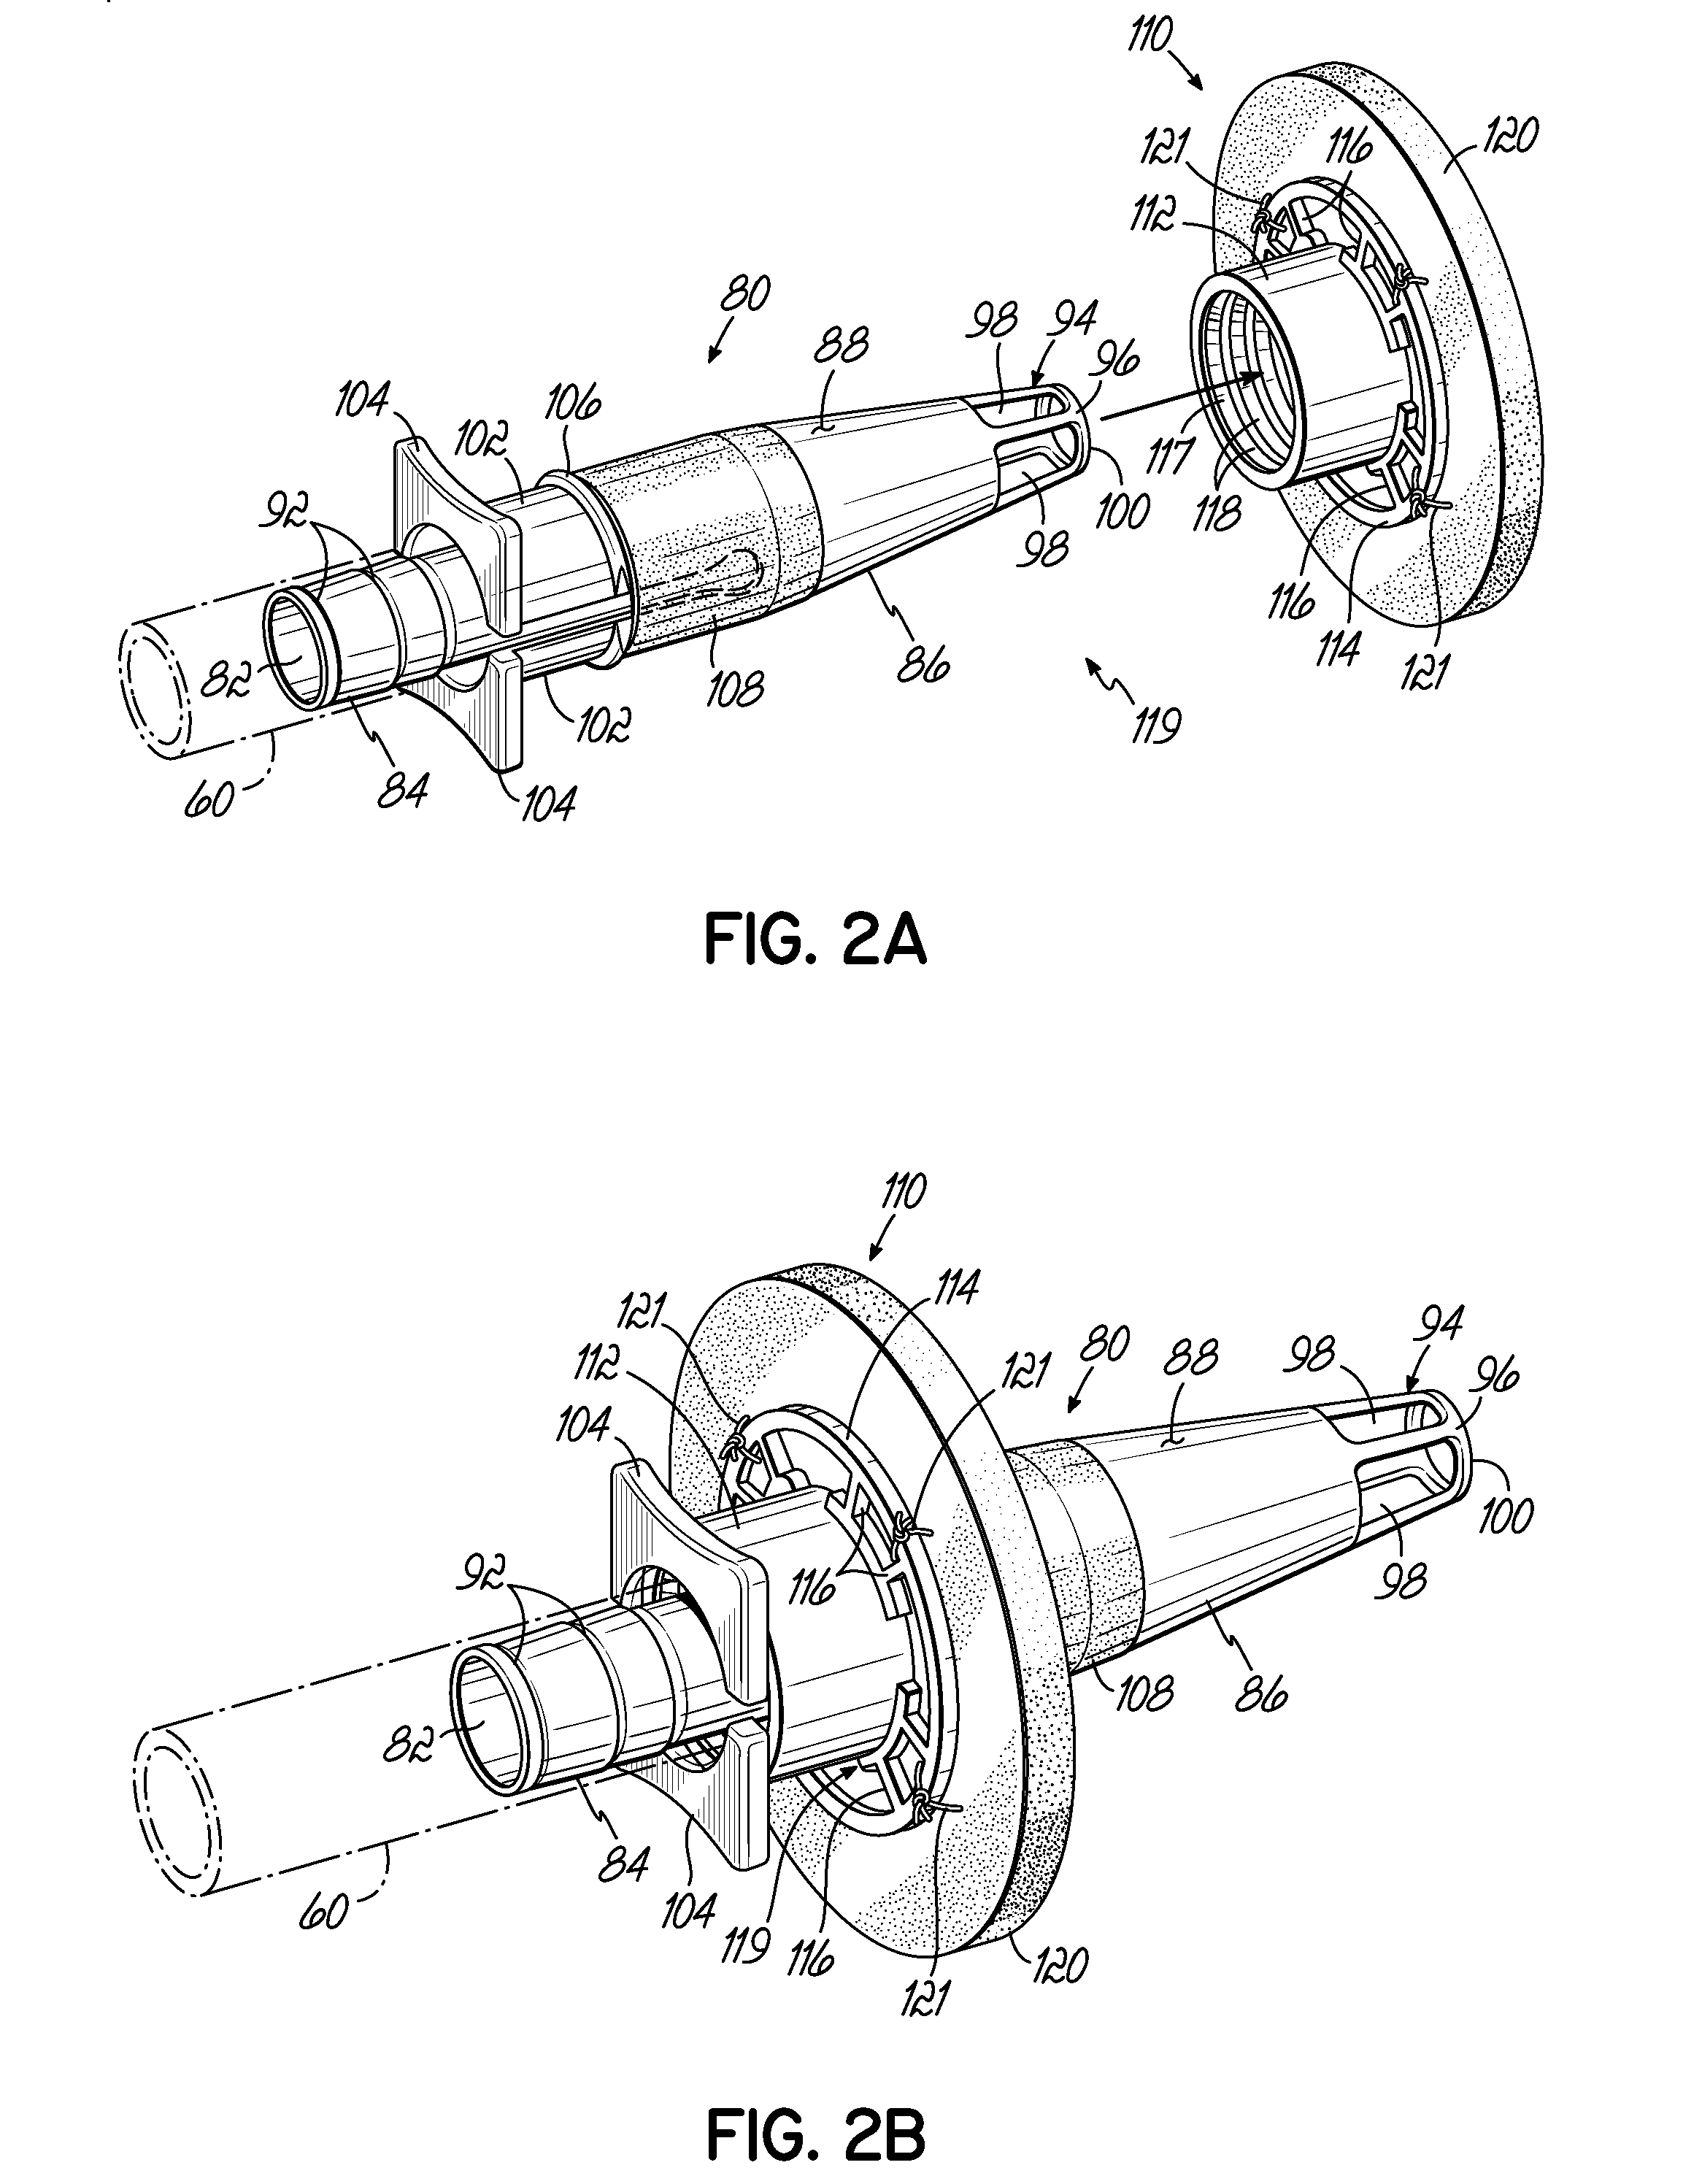 Cannula tips, tissue attachment rings, and methods of delivering and using the same